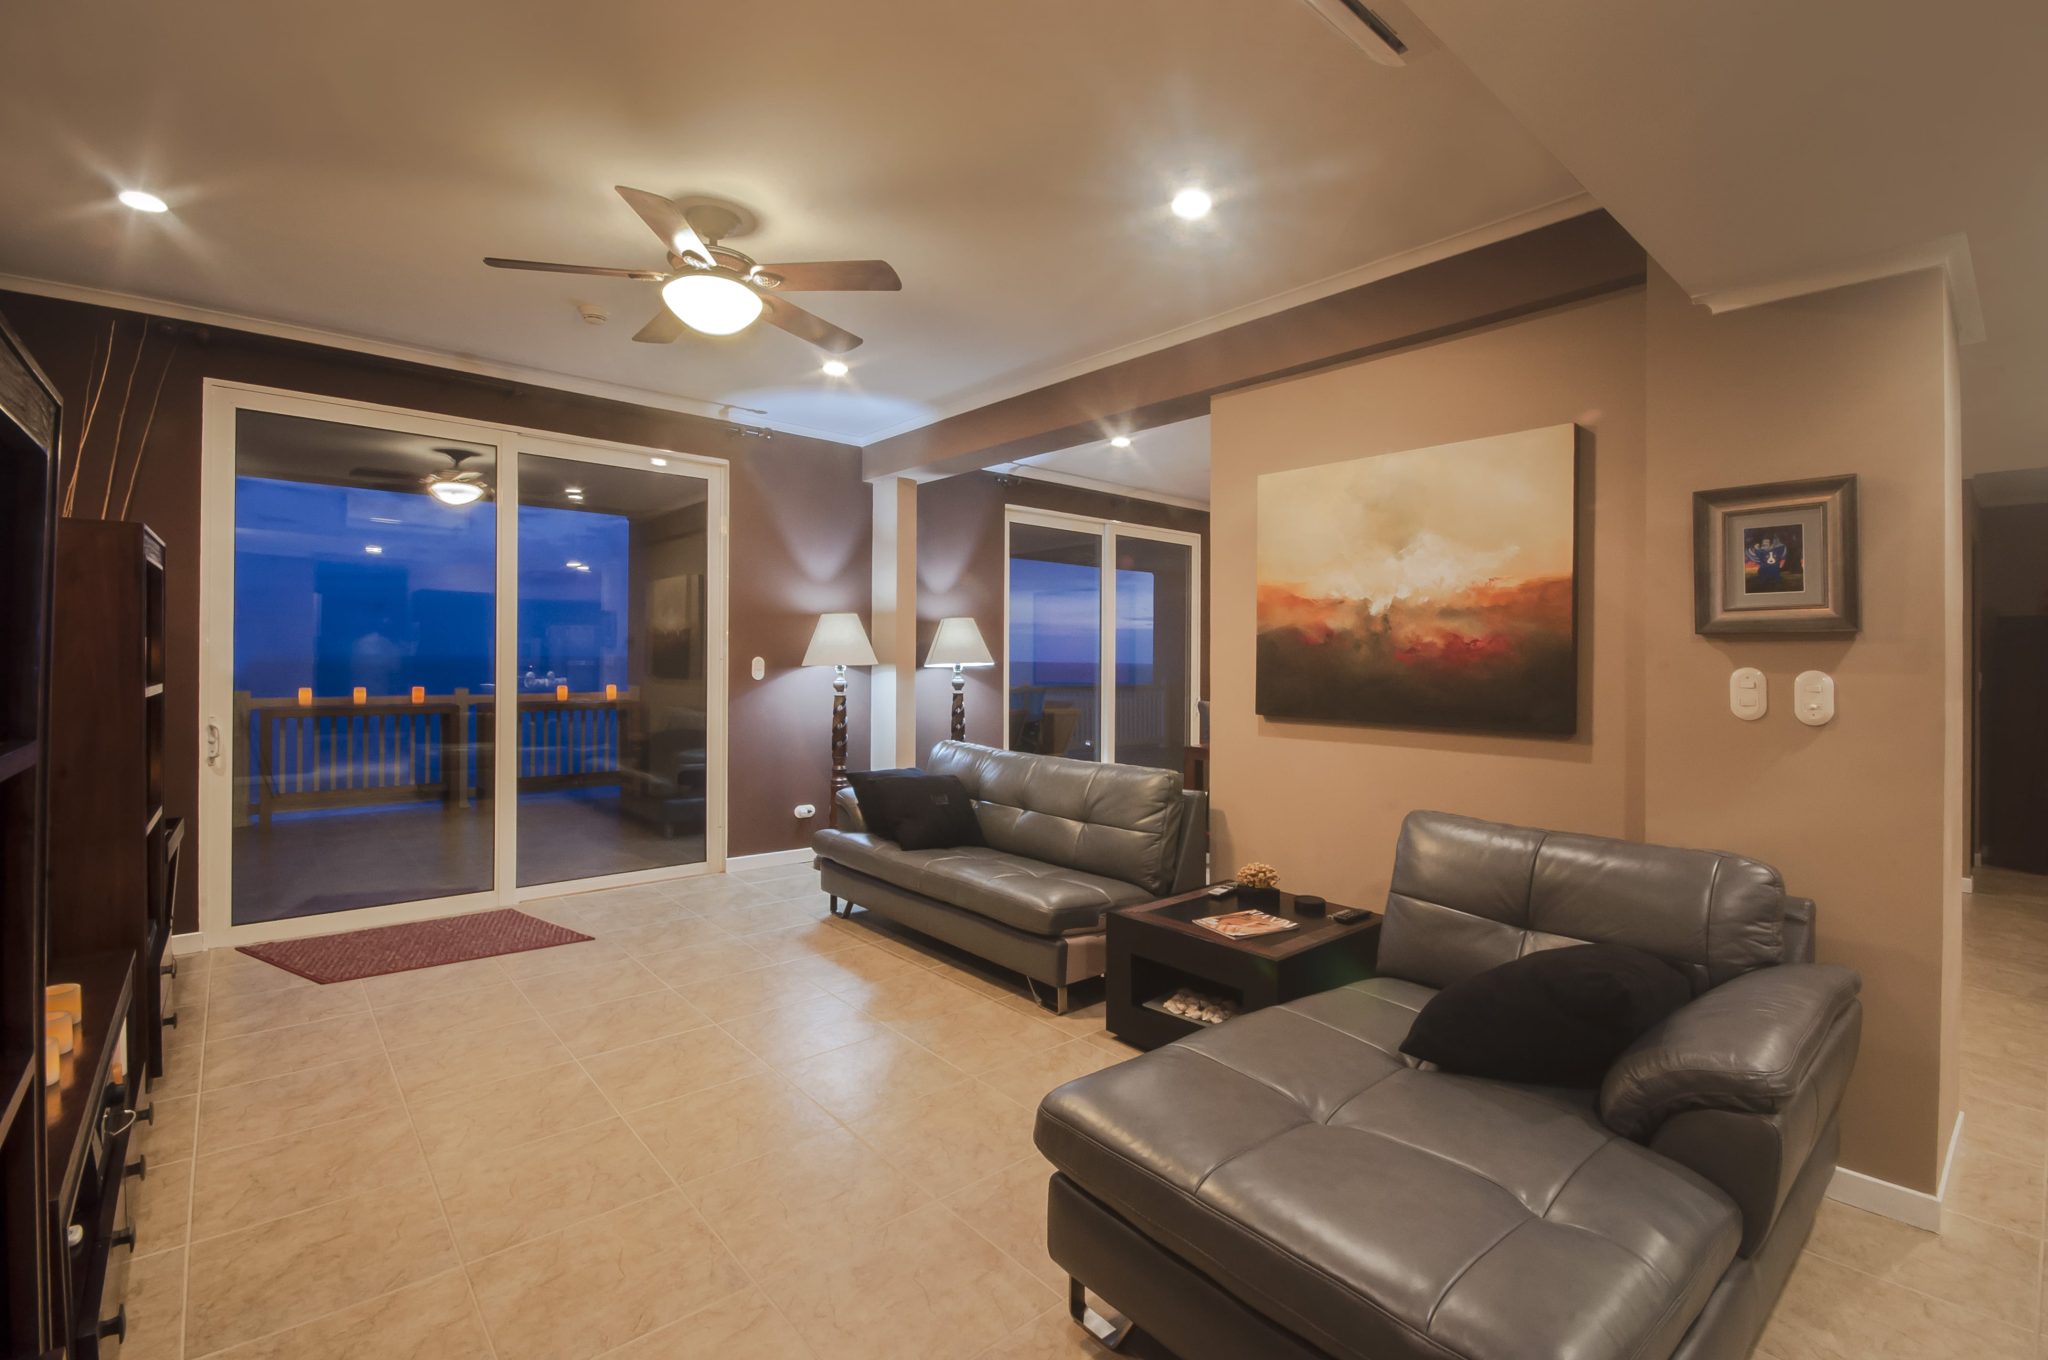 CONDO - 5 Bedroom Luxury Penthouse Ocean View Beachfront Condo With Great Rental Income!!!